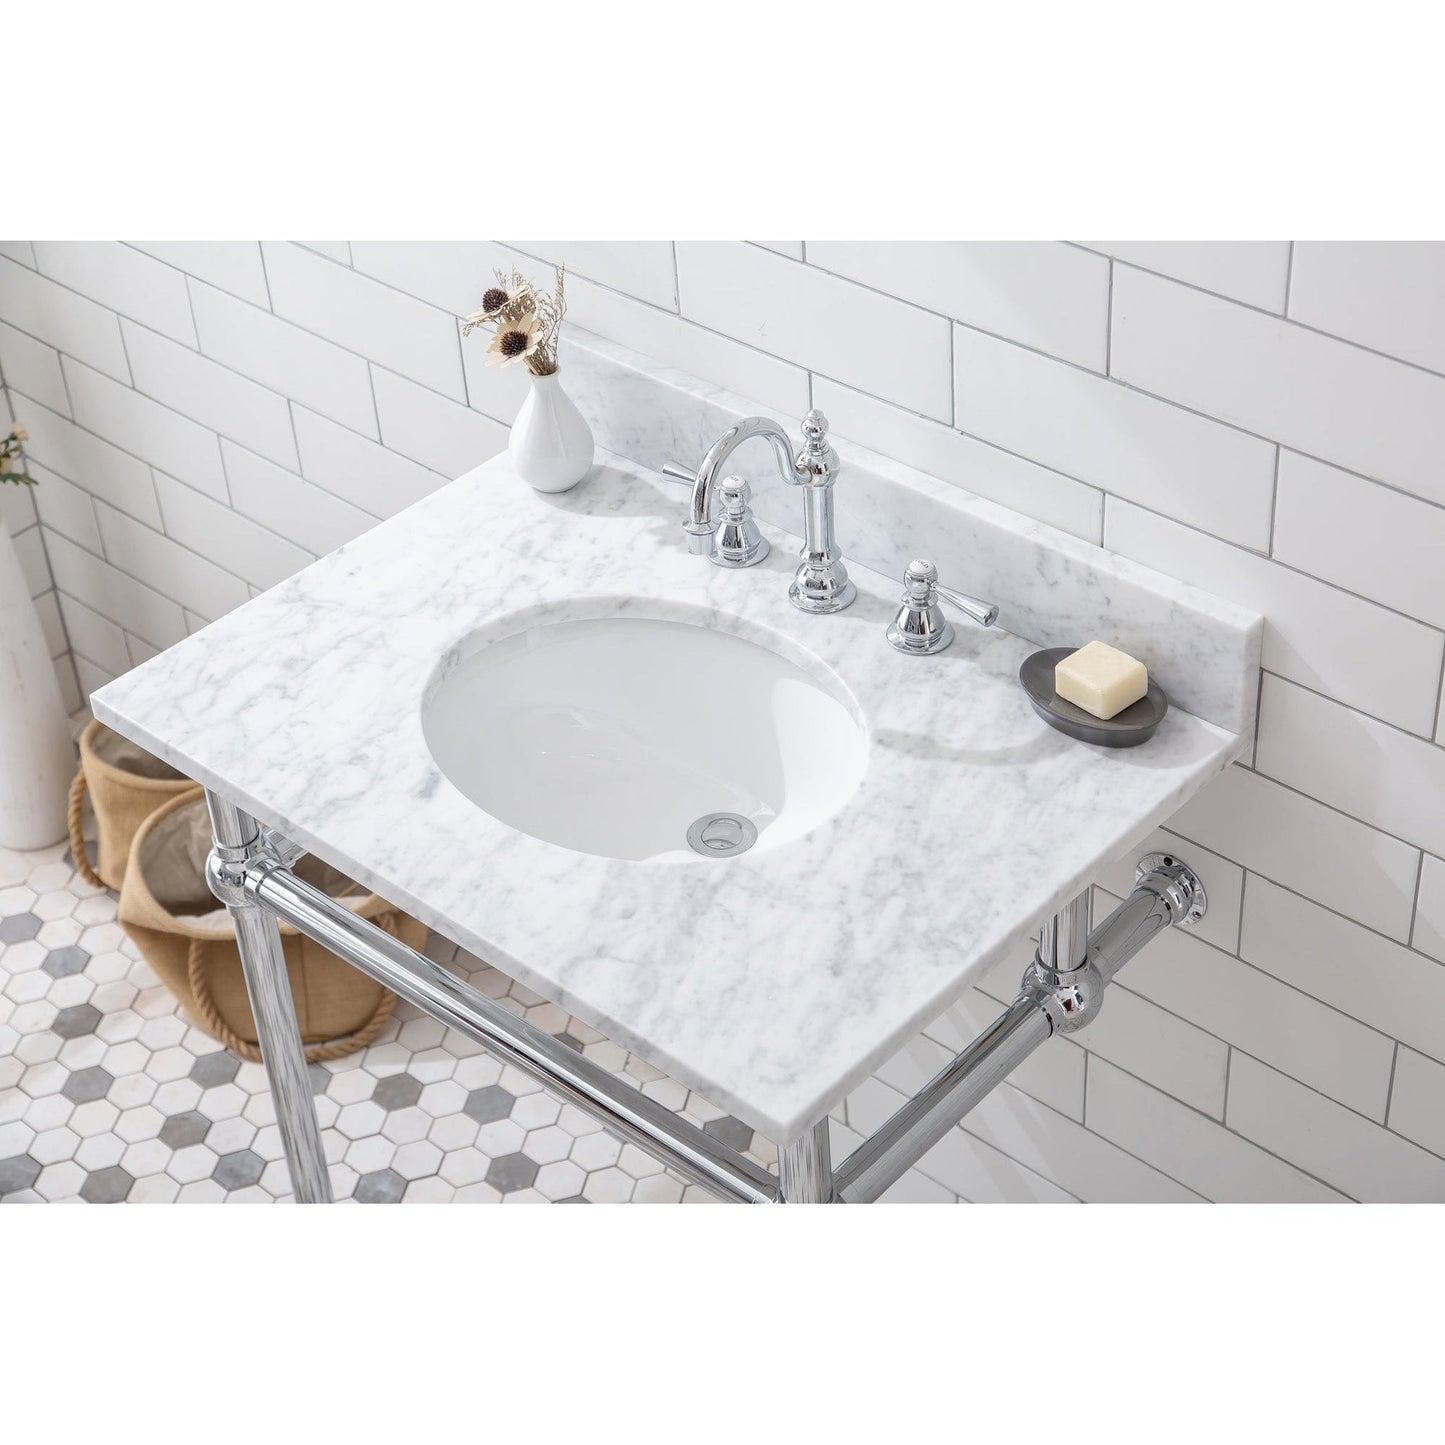 Water Creation Embassy 30" Wide Single Wash Stand, P-Trap, Counter Top with Basin, and F2-0012 Faucet included in Chrome Finish